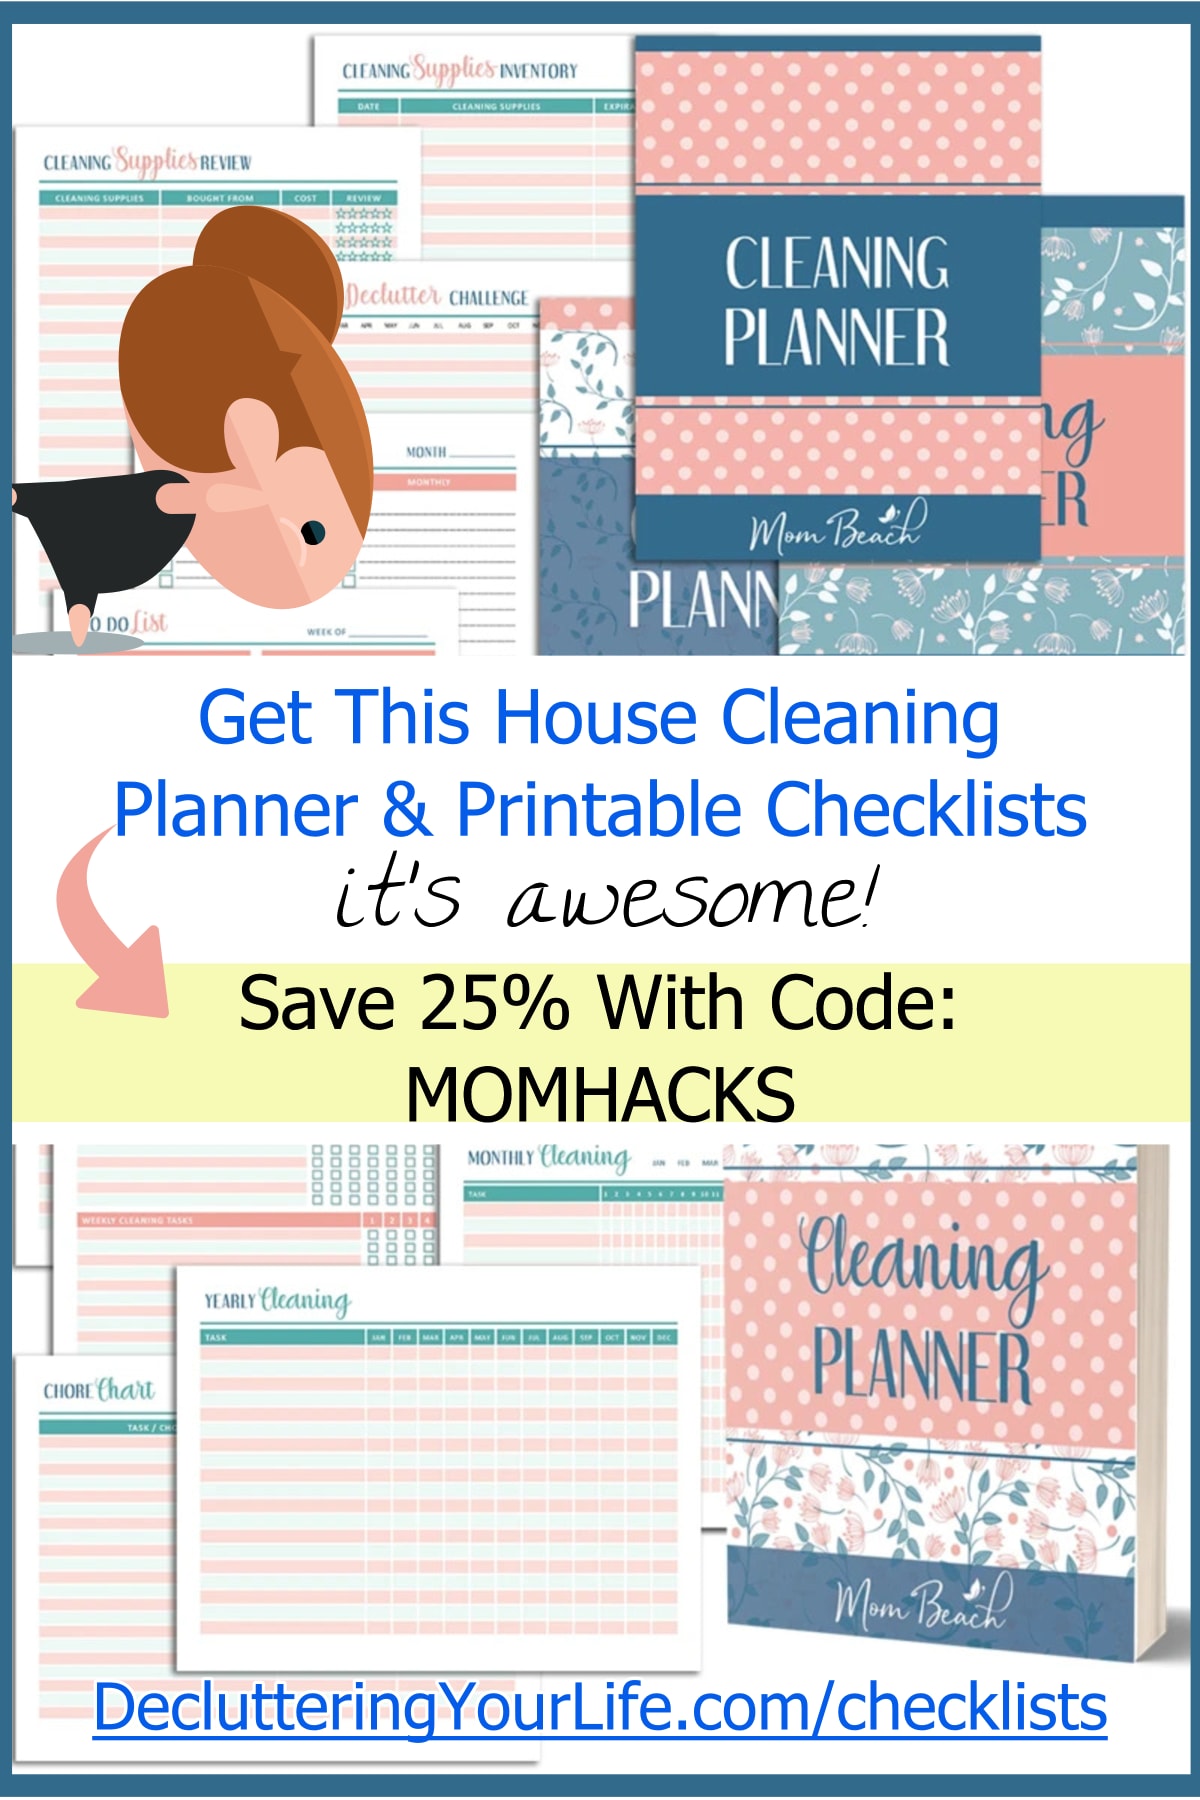 THe BEST house cleaning checklists, cleaning schedules and housekeeping printables. This cleaning planner will help you keep your house clean WITHOUT feeling overwhelmed.